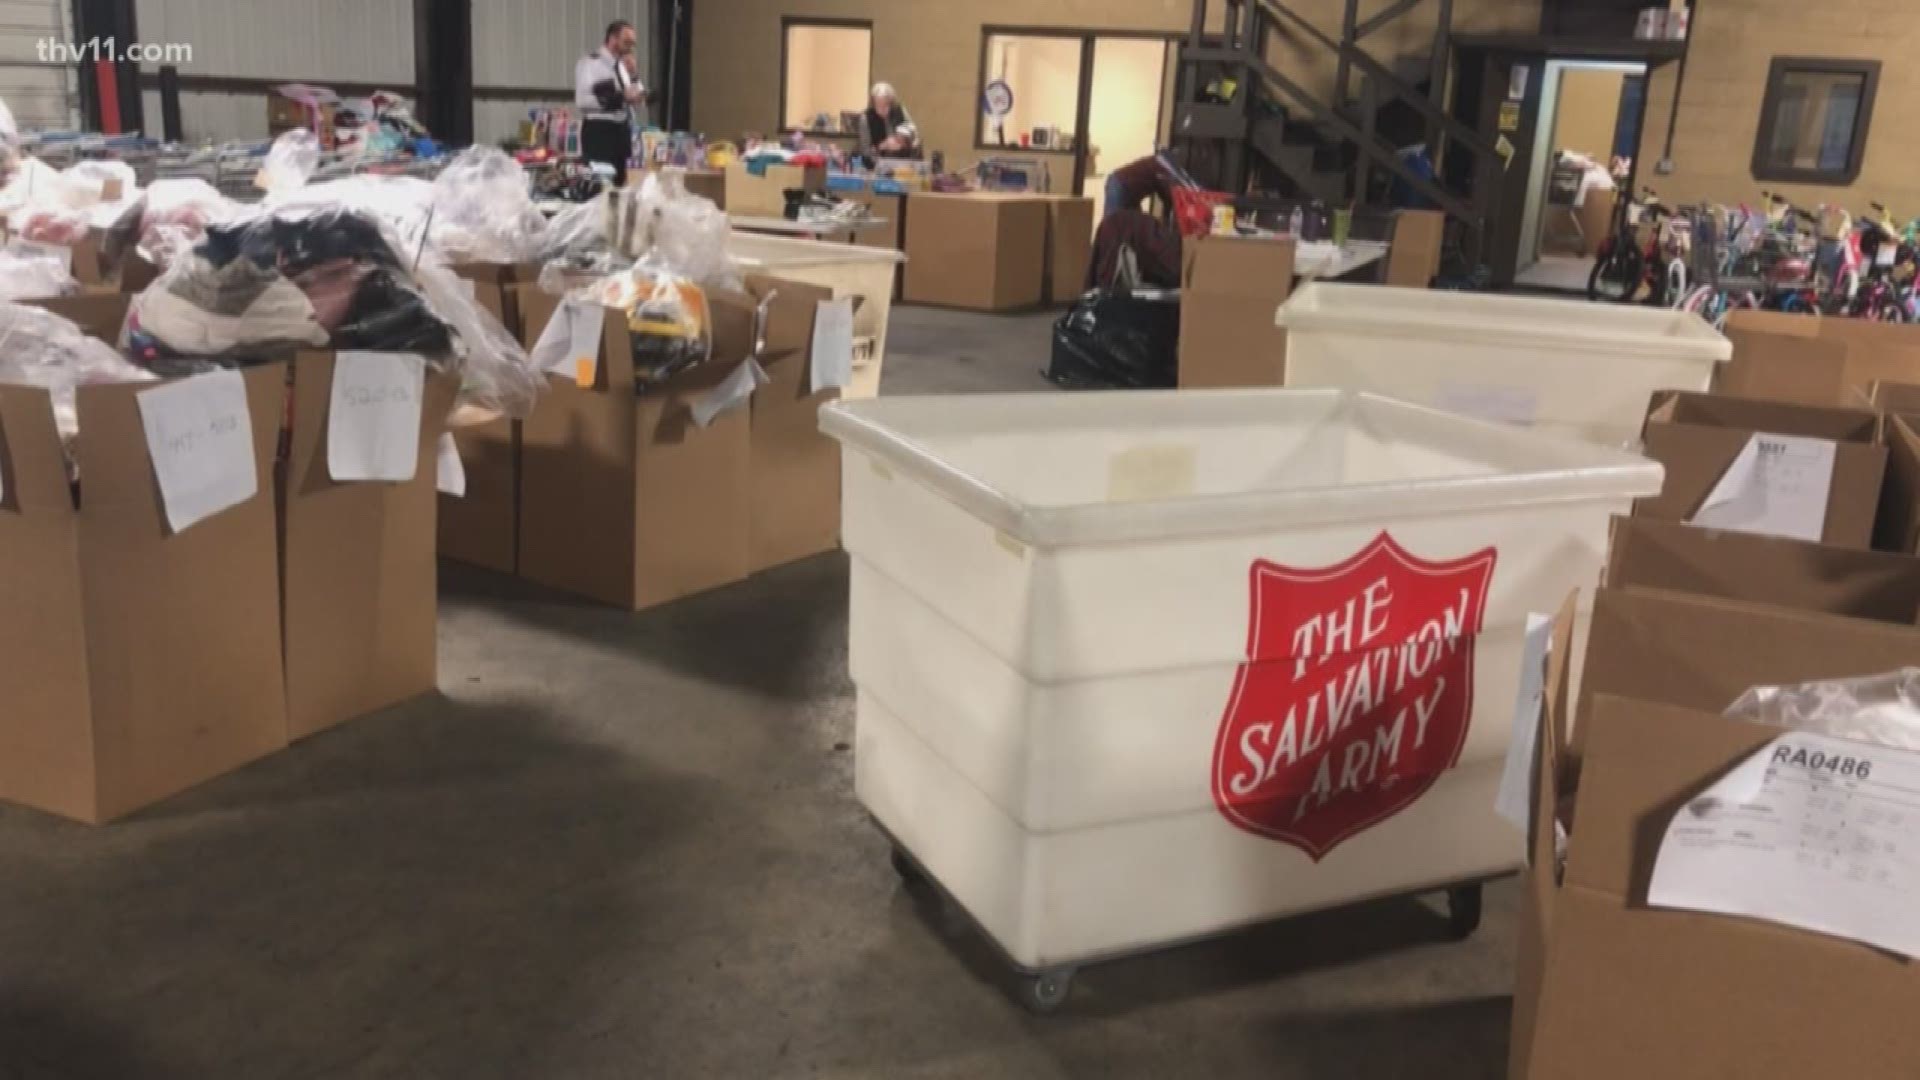 The Salvation Army begins handing out presents to thousands of kids tomorrow, but it's scrambling to purchase them, because donations came up well short of the goal.